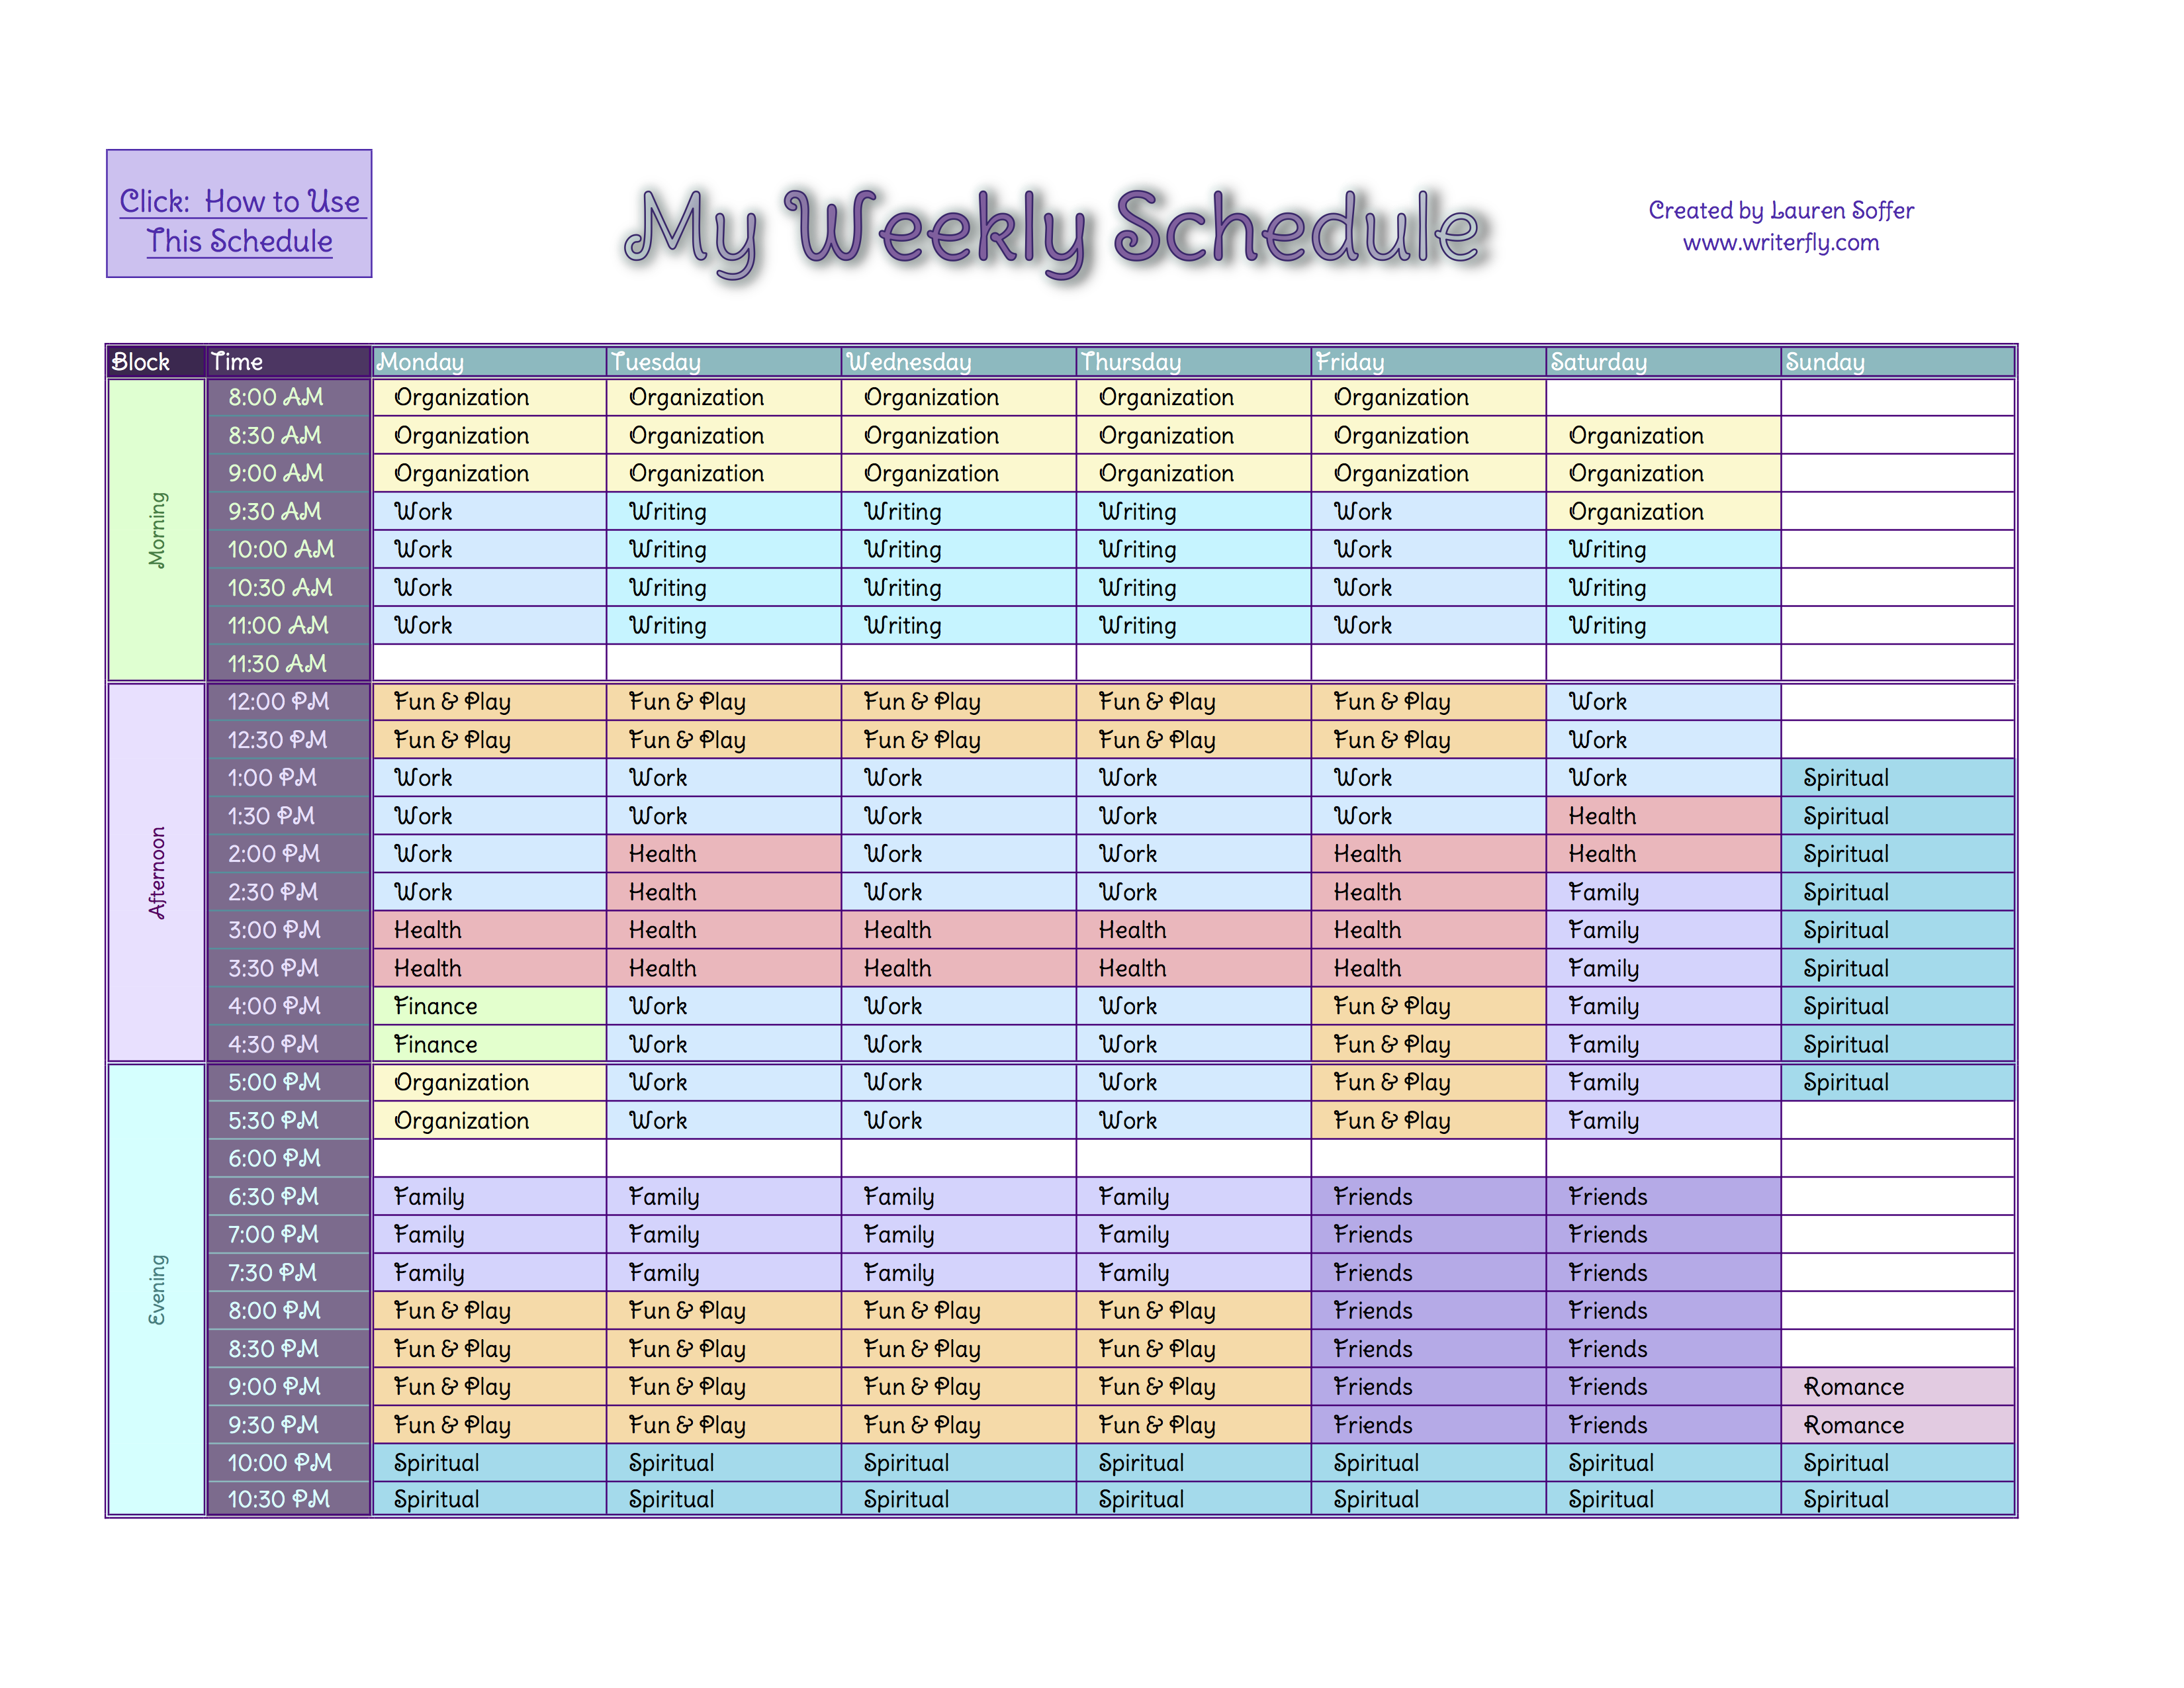 Time management template: weekly schedule. Going to give this a 